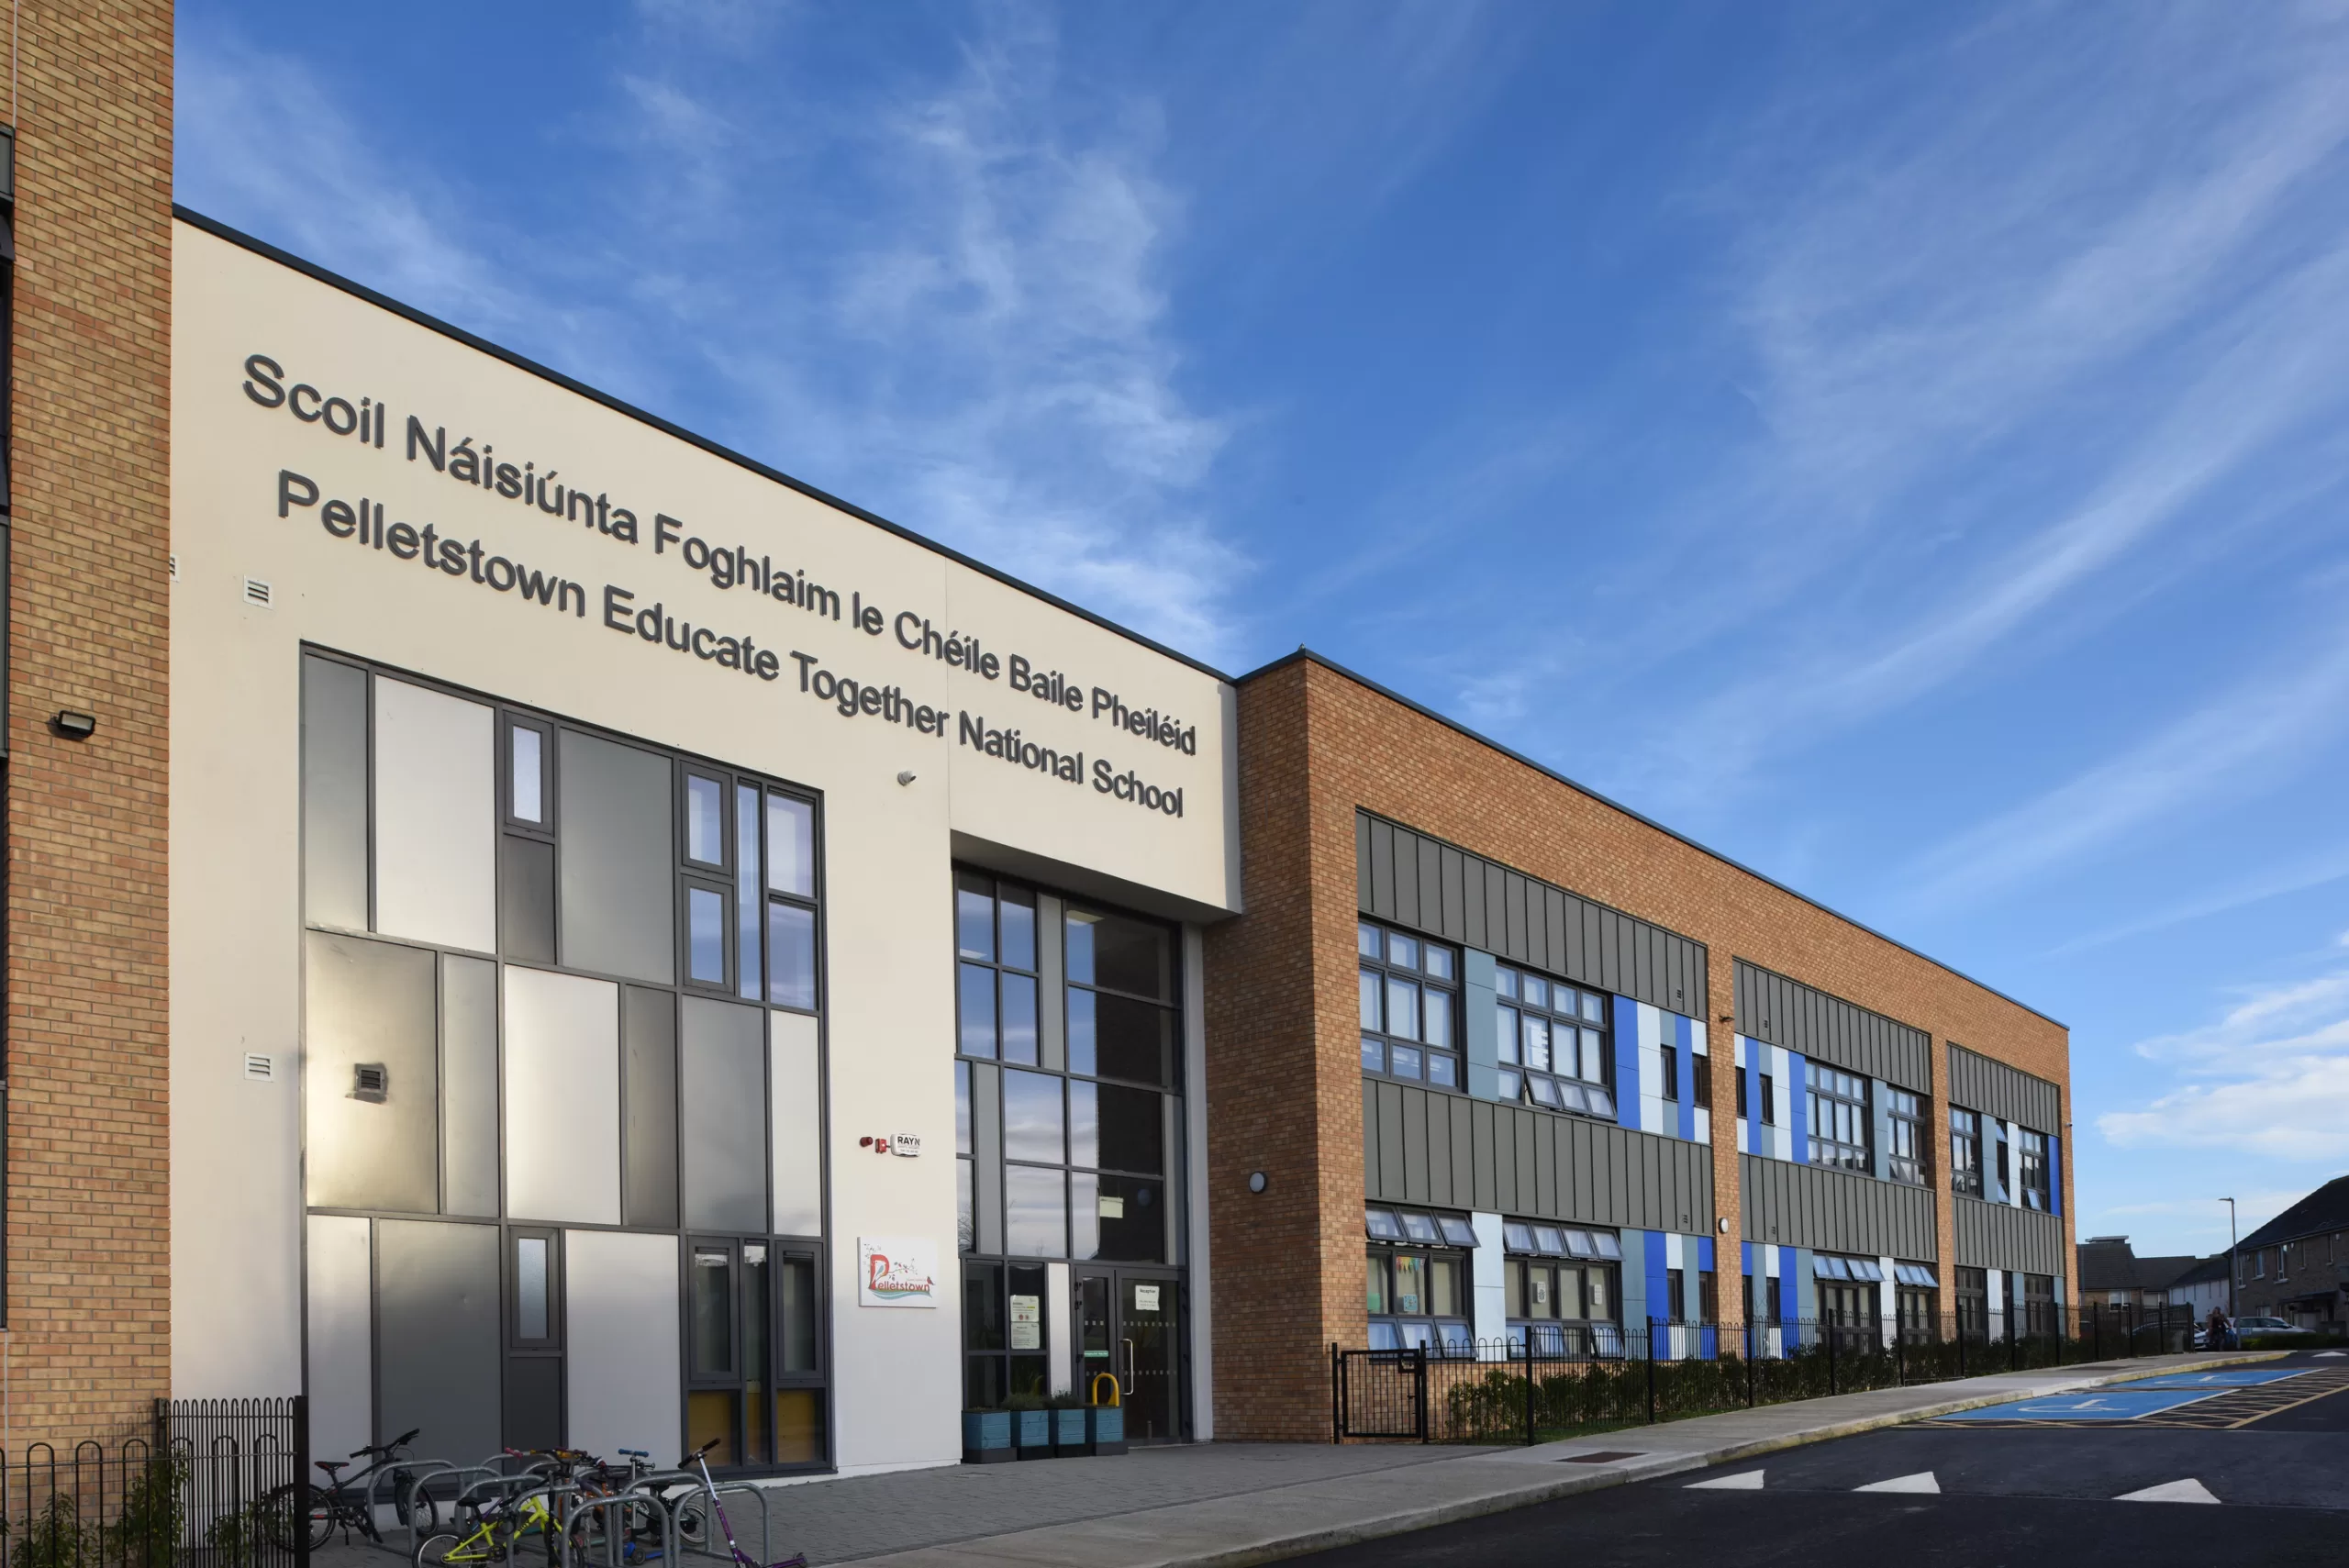 Successful Completion & Handover of Pelletstown Educate Together National School